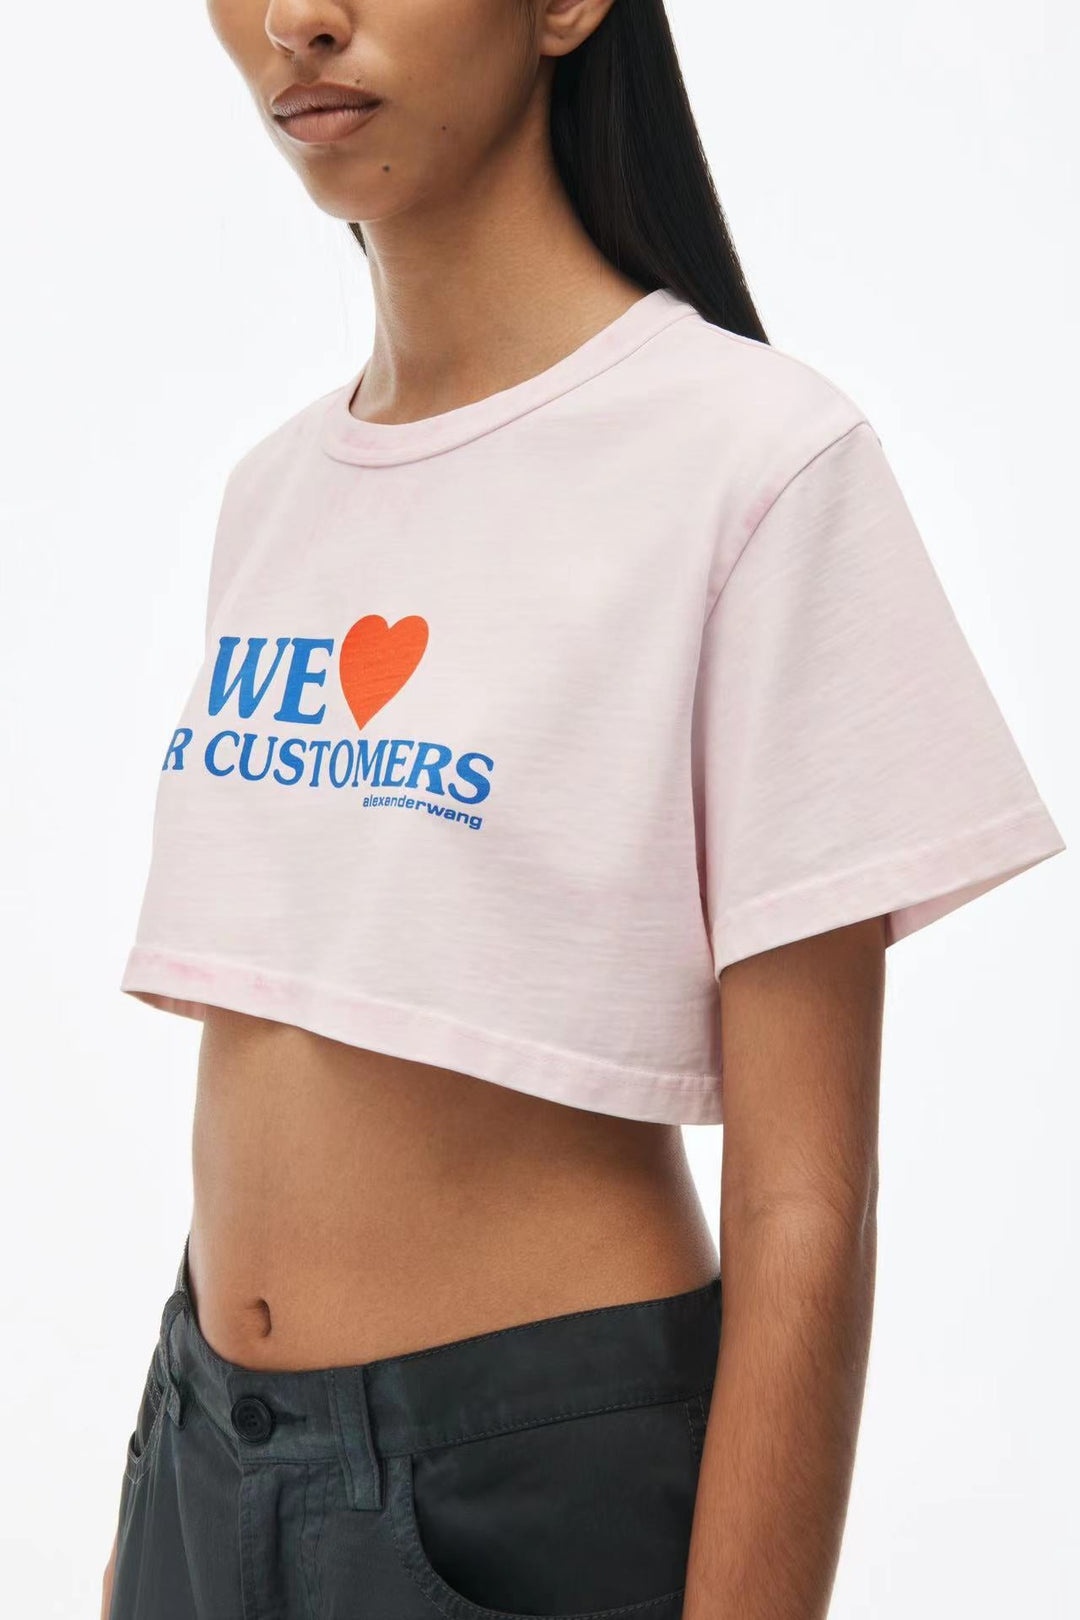 Love Our Customers Cropped Tee - 2